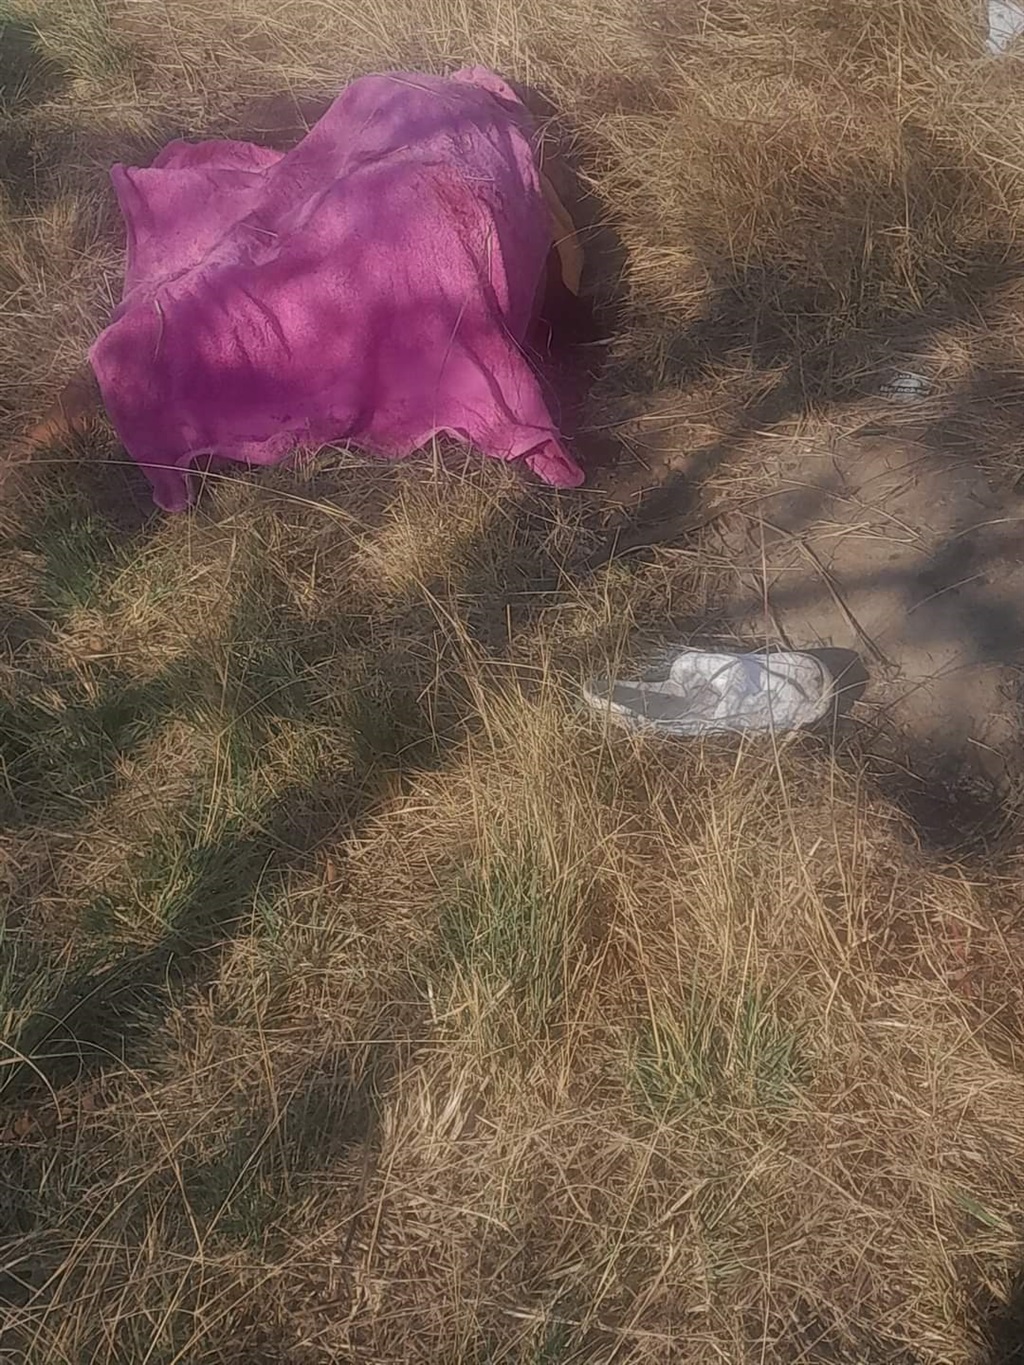 The body of a woman that was found in Umlazi.